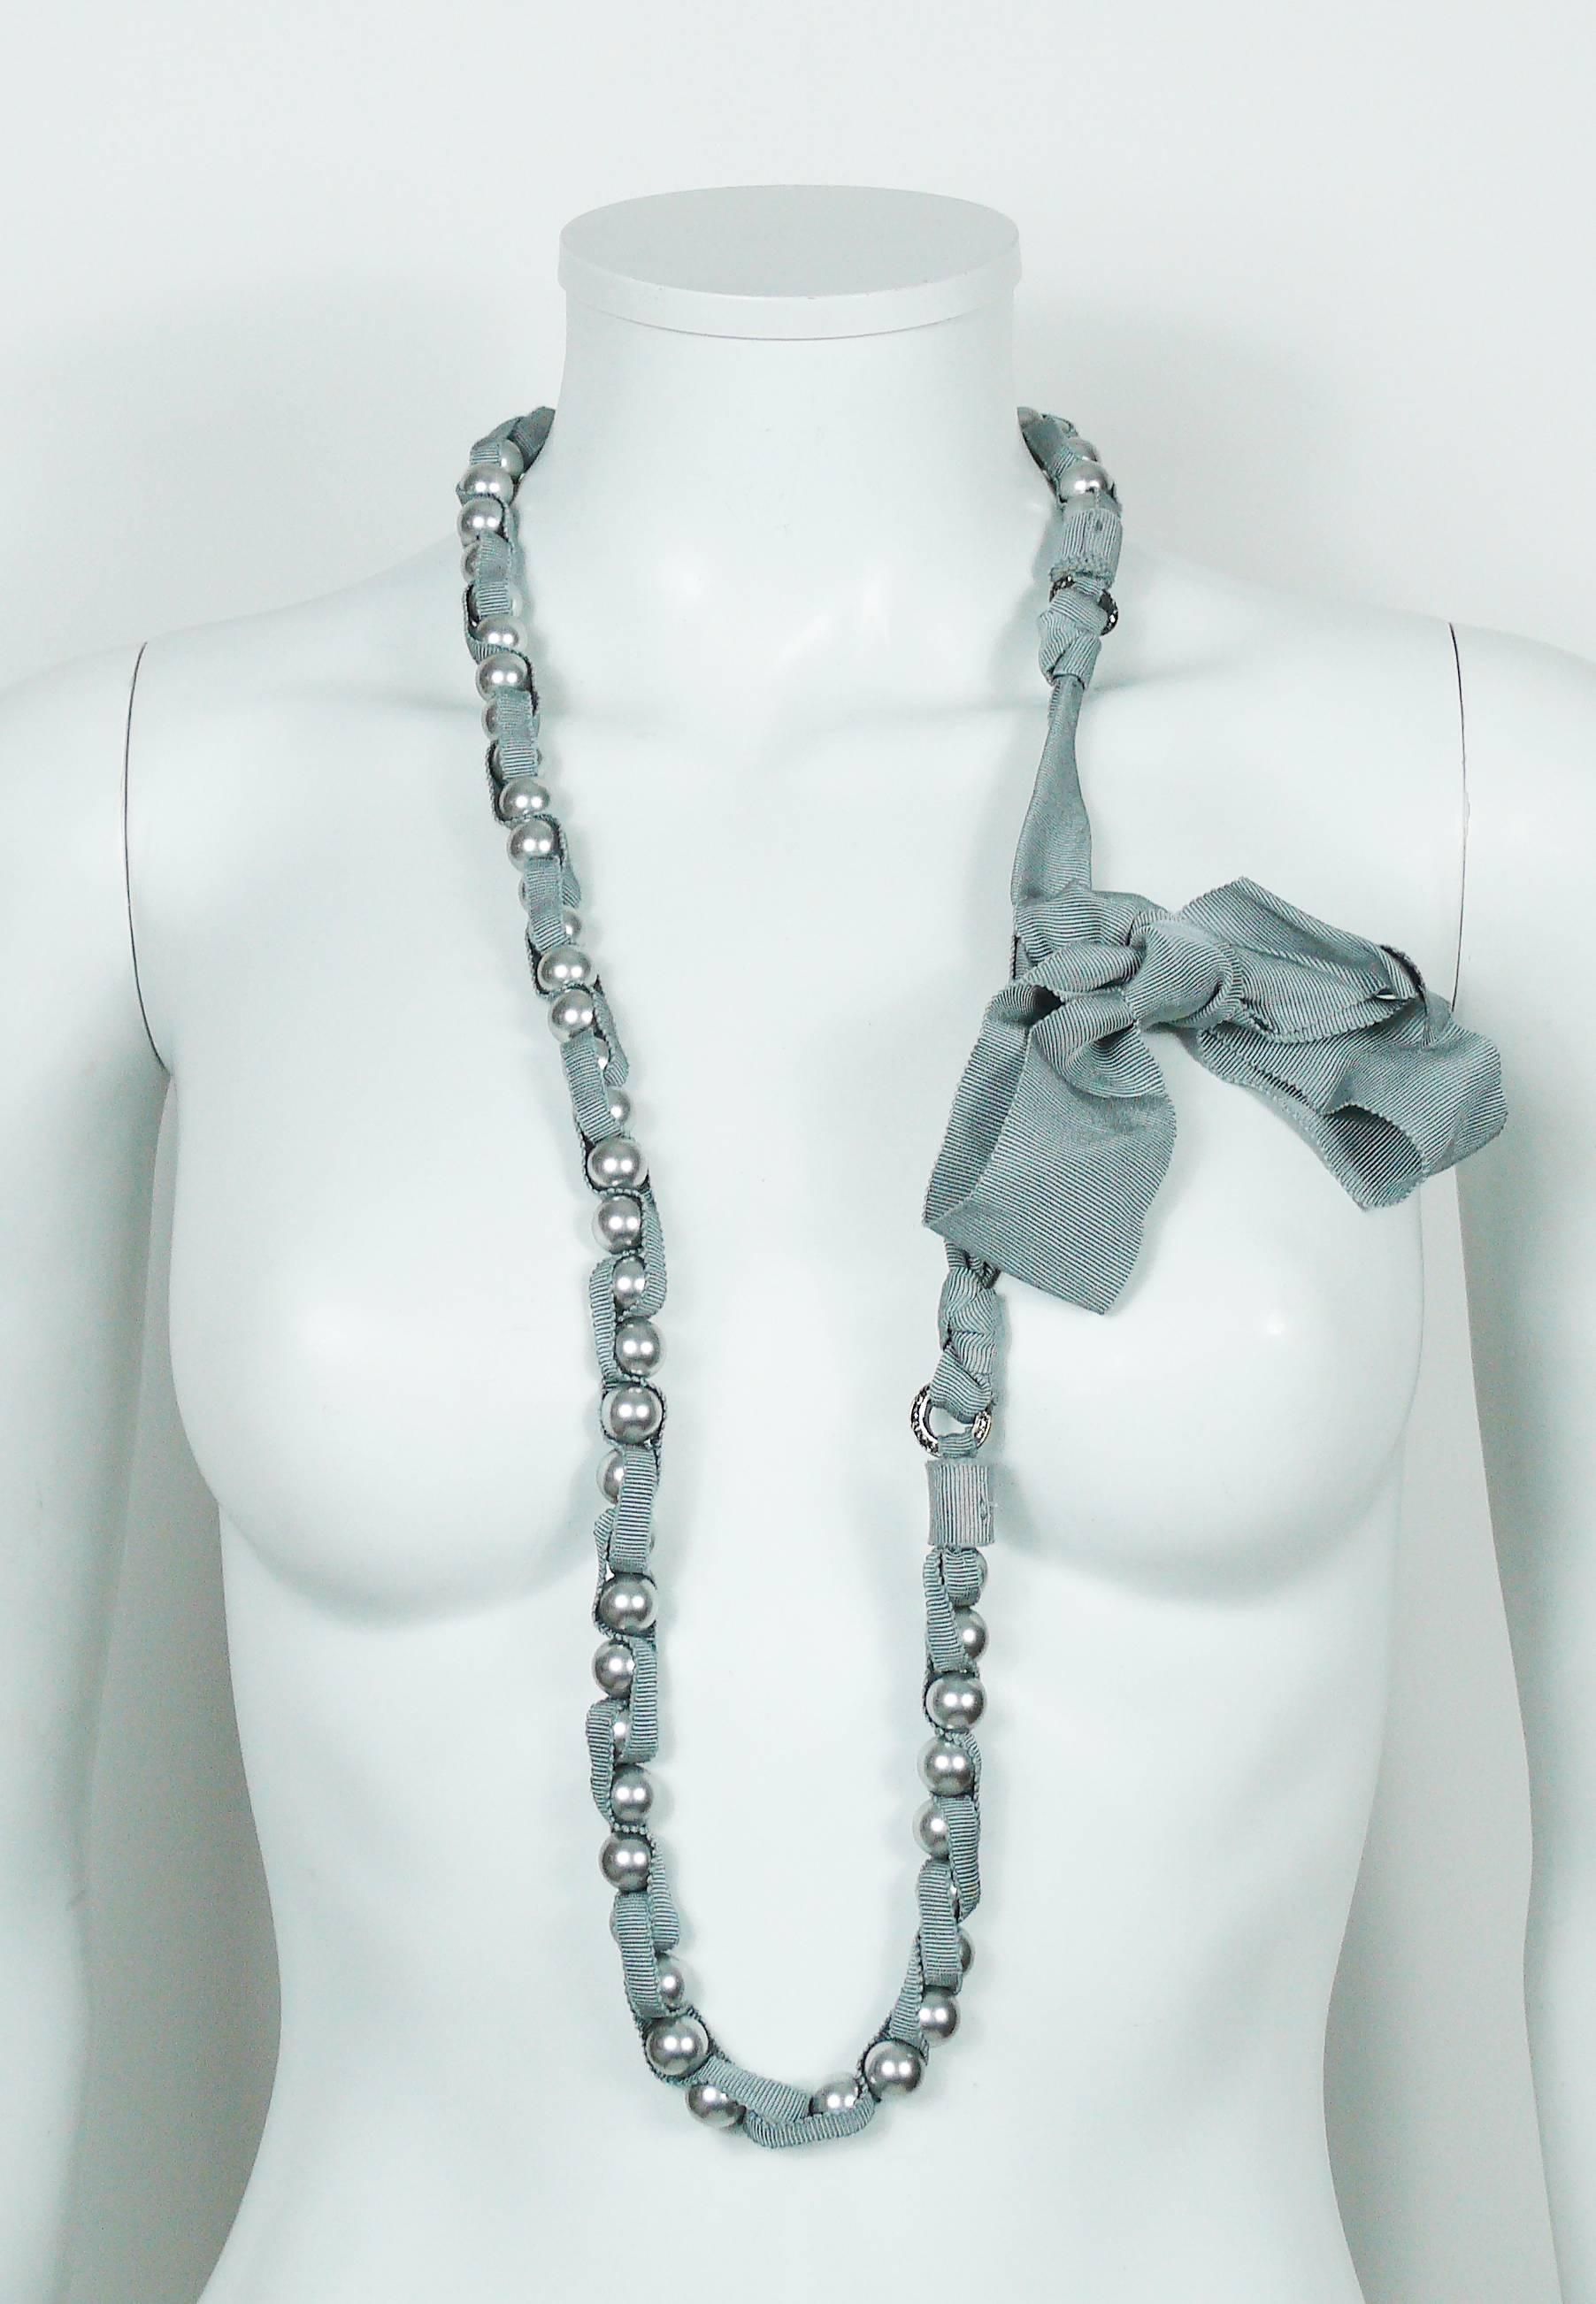 LANVIN grey pearl and grosgrain ribbon long sautoir necklace.

Tie closure

Marked  LANVIN Paris Made in France.

Indicative measurements : total max. length approx. 170 cm (66.93 inches).

JEWELRY CONDITION CHART
- New or never worn : item is in